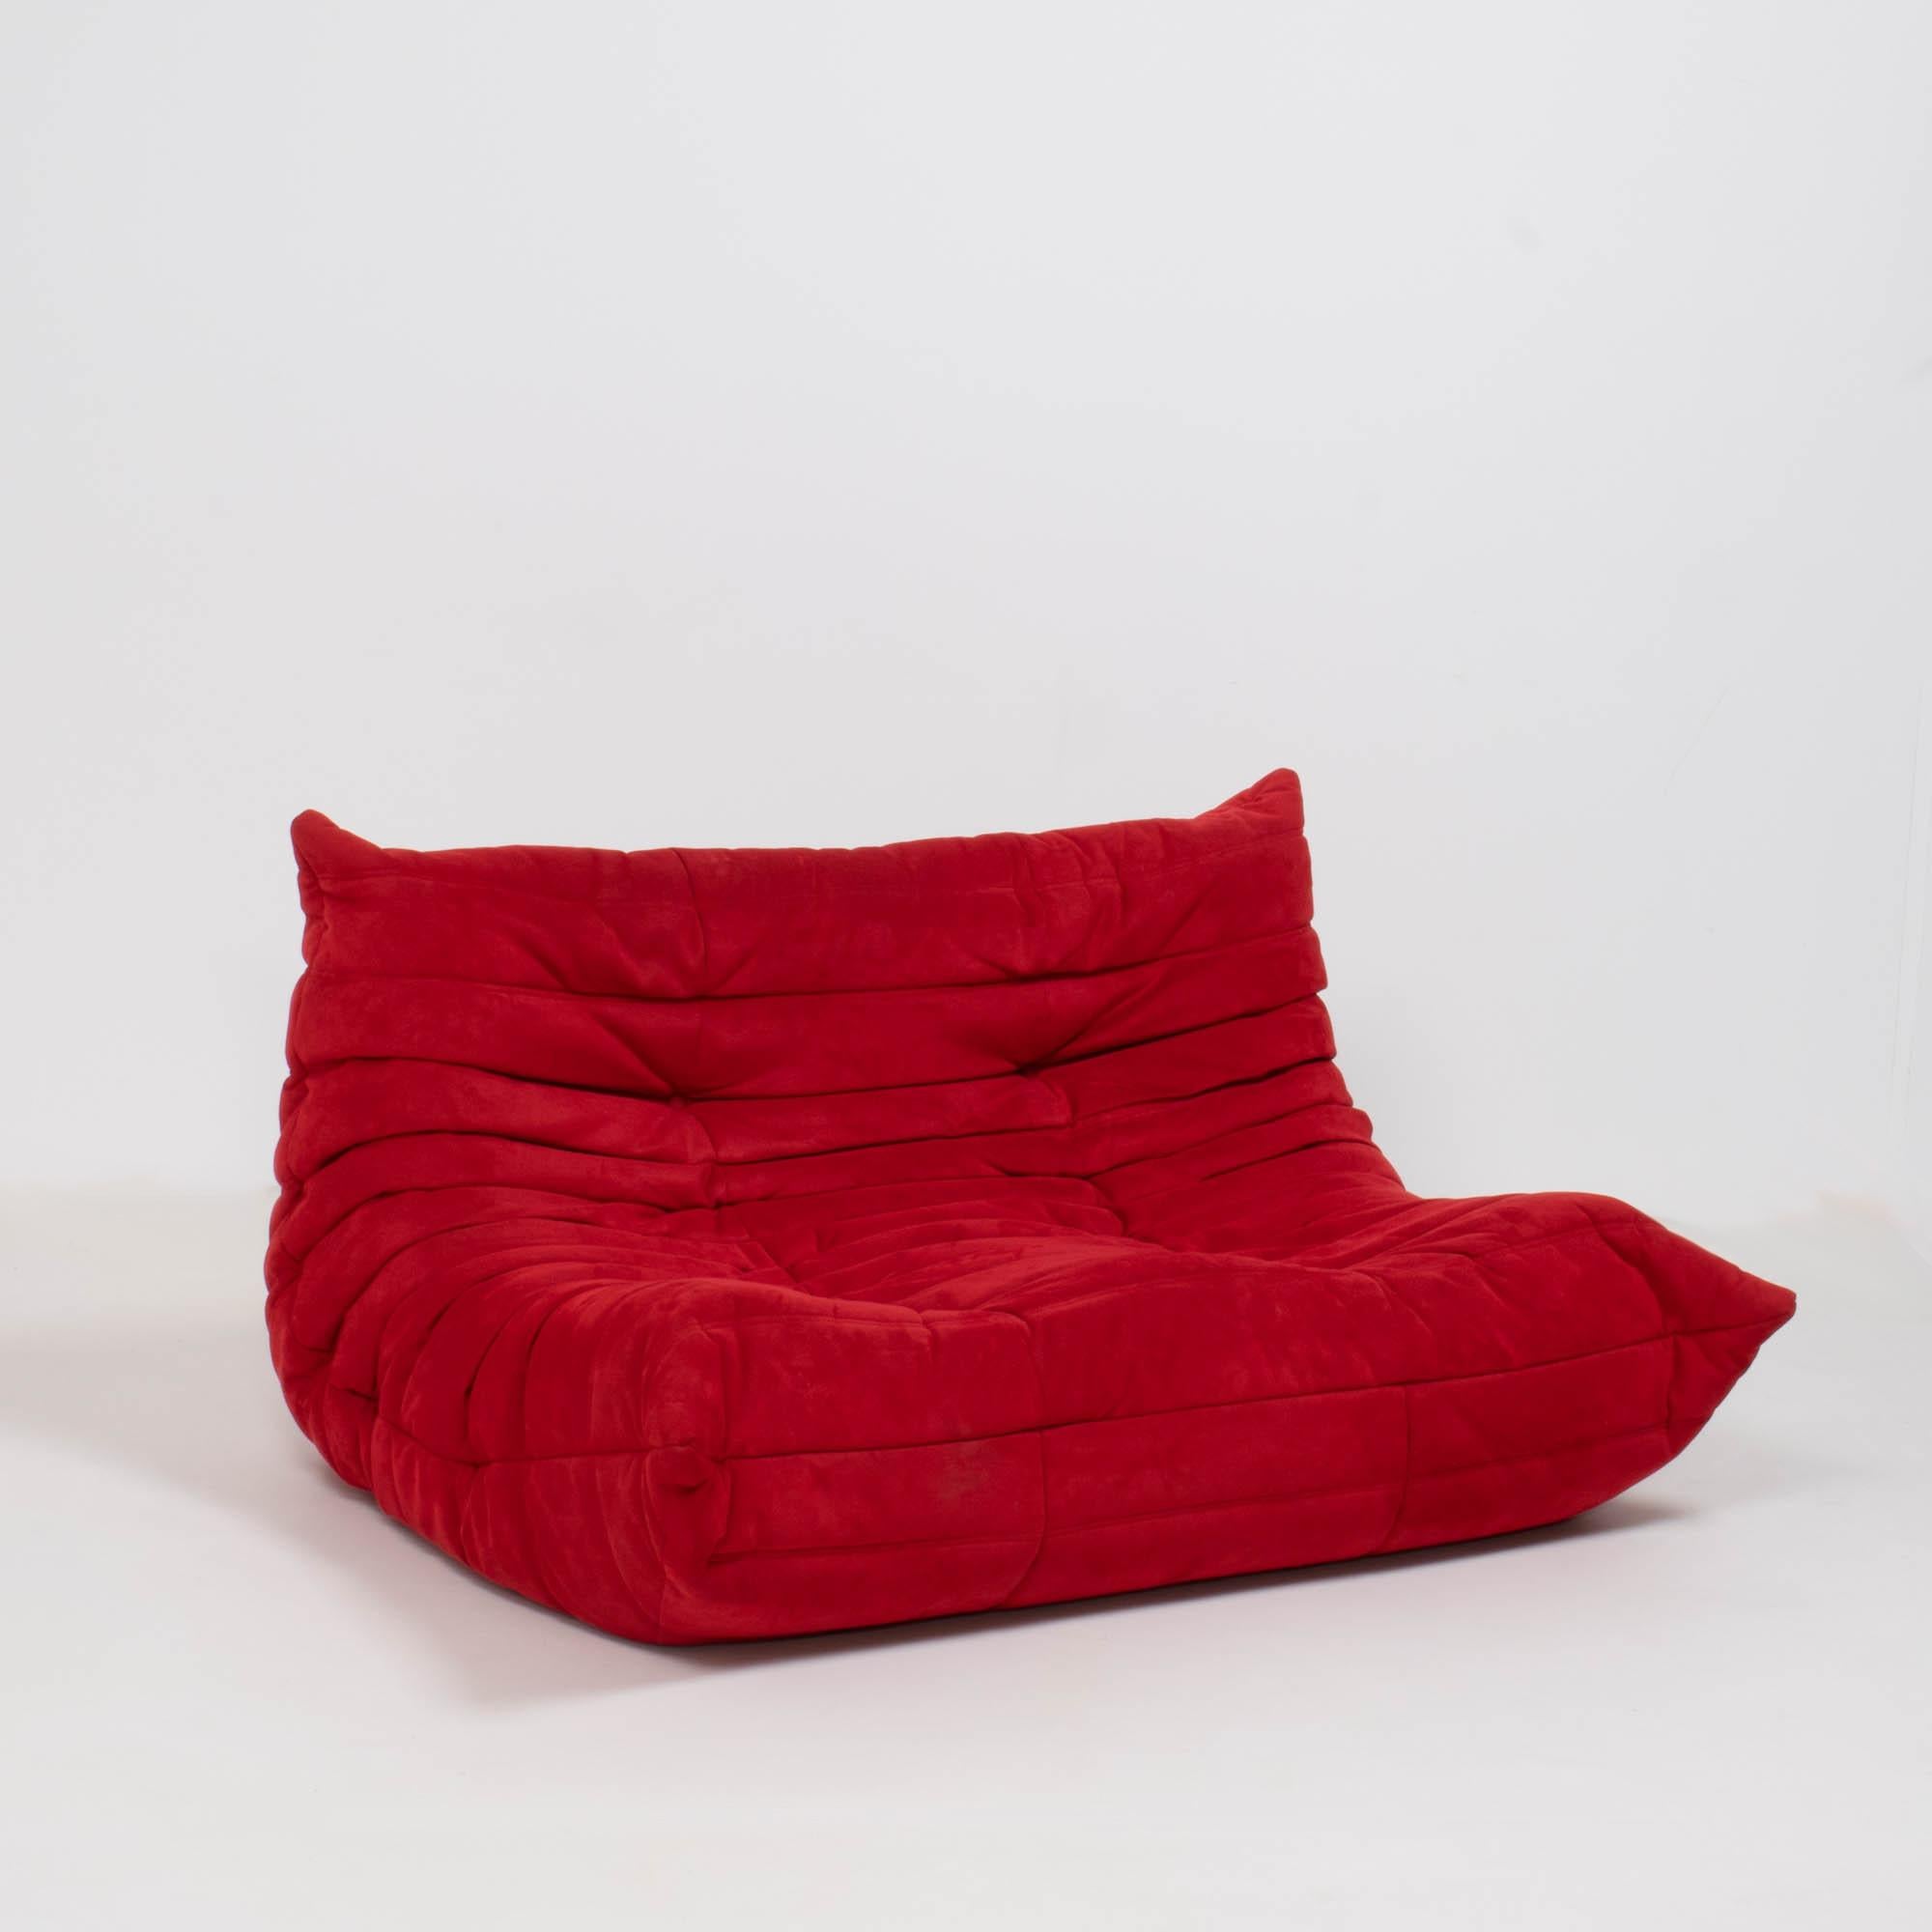 The iconic Togo sofa, originally designed by Michel Ducaroy for Ligne Roset in 1973 has become a design Classic.

The sofa features the original red suede upholstery and the instantly recognizable pleated fabric design, which gives the sofa its